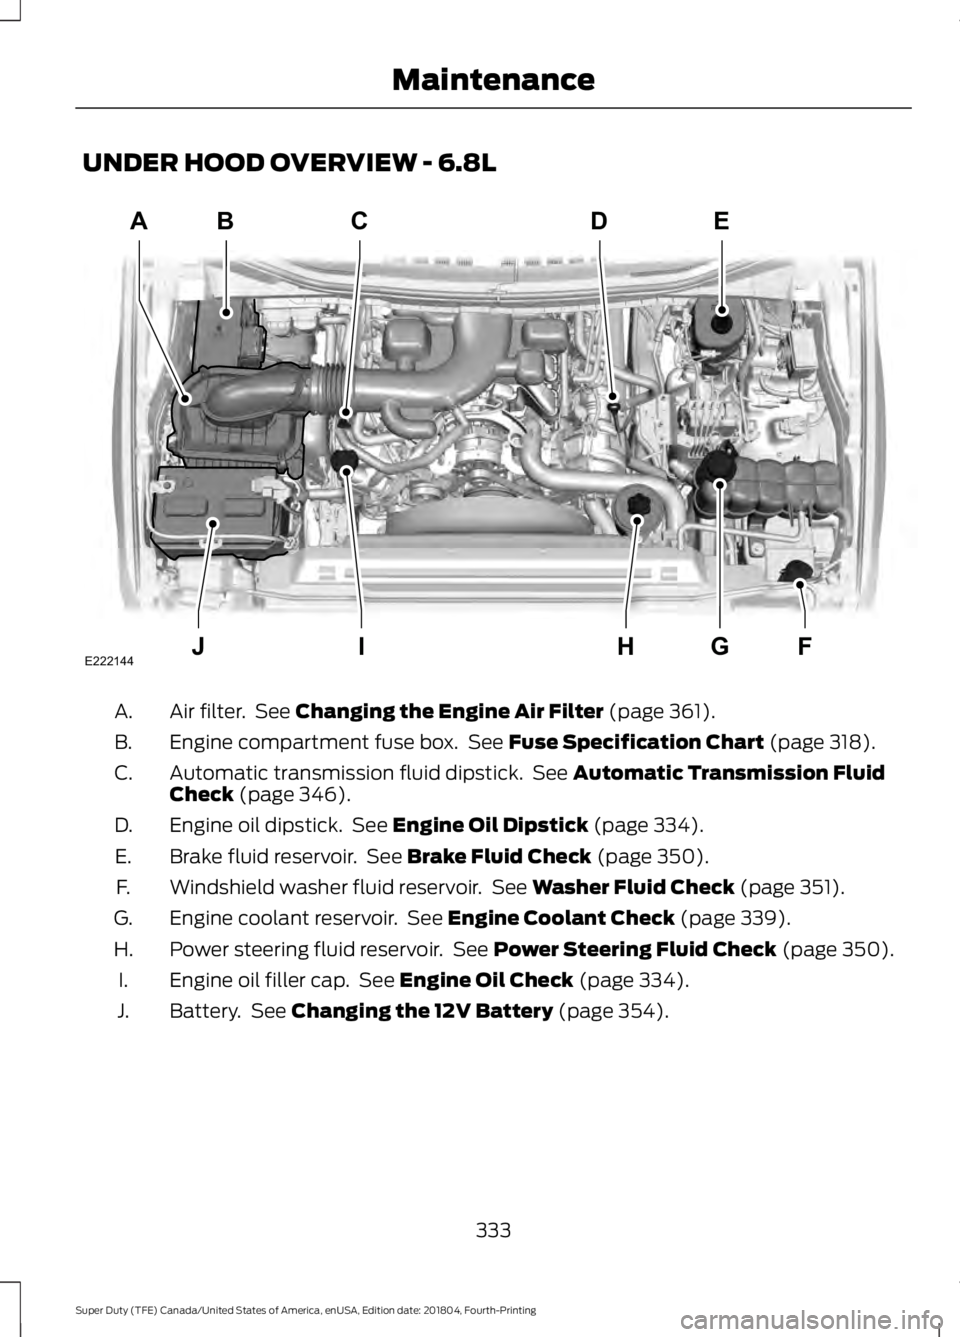 FORD SUPER DUTY 2019  Owners Manual UNDER HOOD OVERVIEW - 6.8L
Air filter.  See Changing the Engine Air Filter (page 361).
A.
Engine compartment fuse box.  See 
Fuse Specification Chart (page 318).
B.
Automatic transmission fluid dipsti